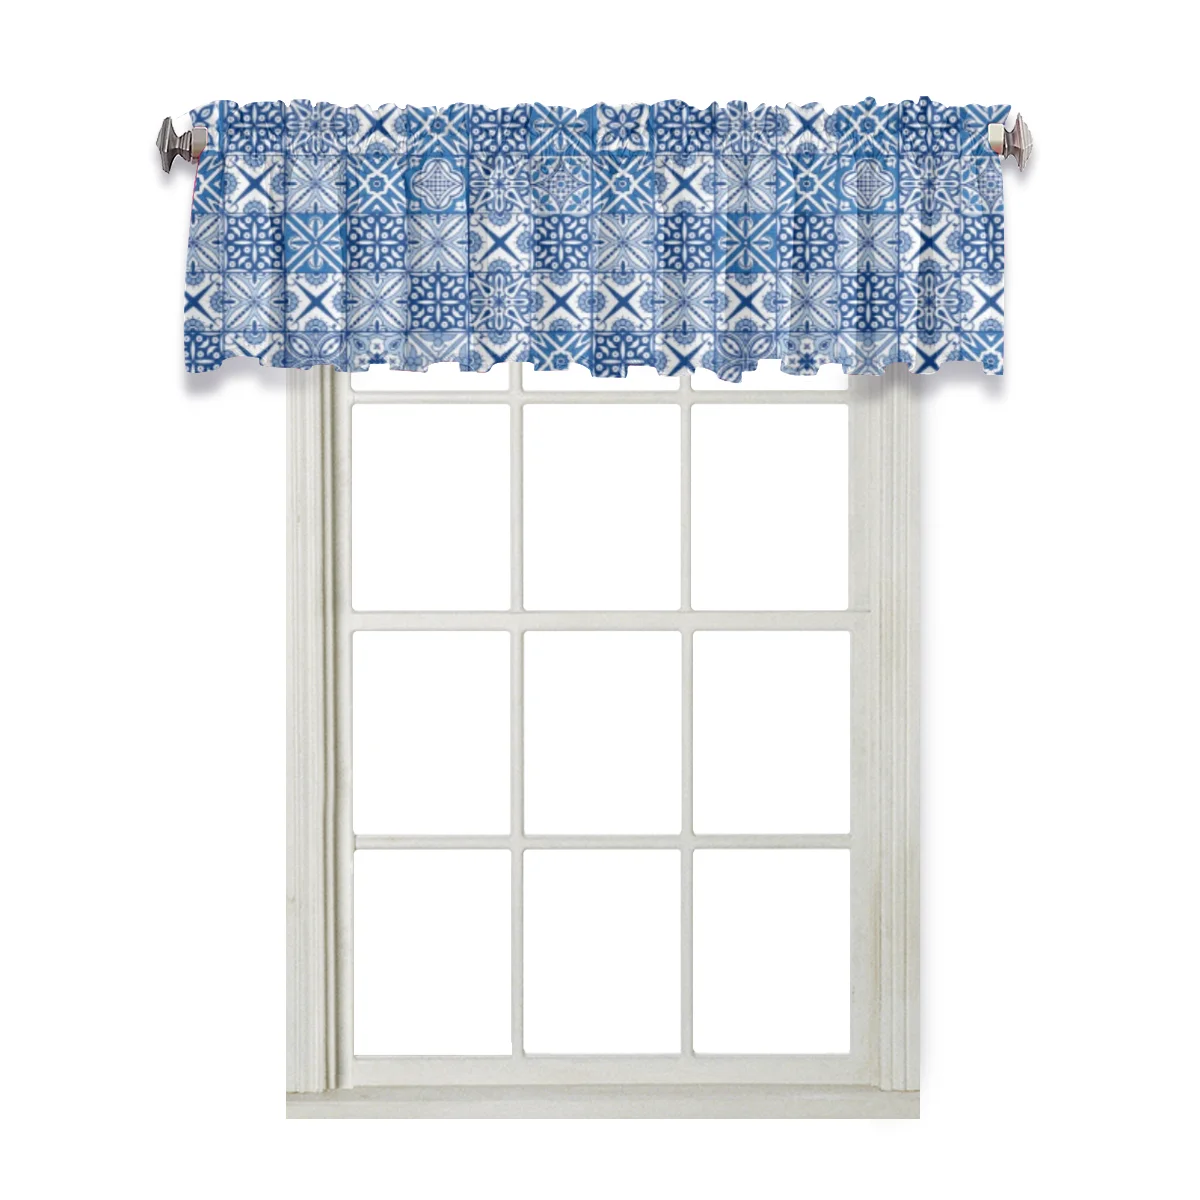 Best Selling Geometric Art Valance Blackout Curtains Attached Valance Factory Wholesale Modern Valance Curtains